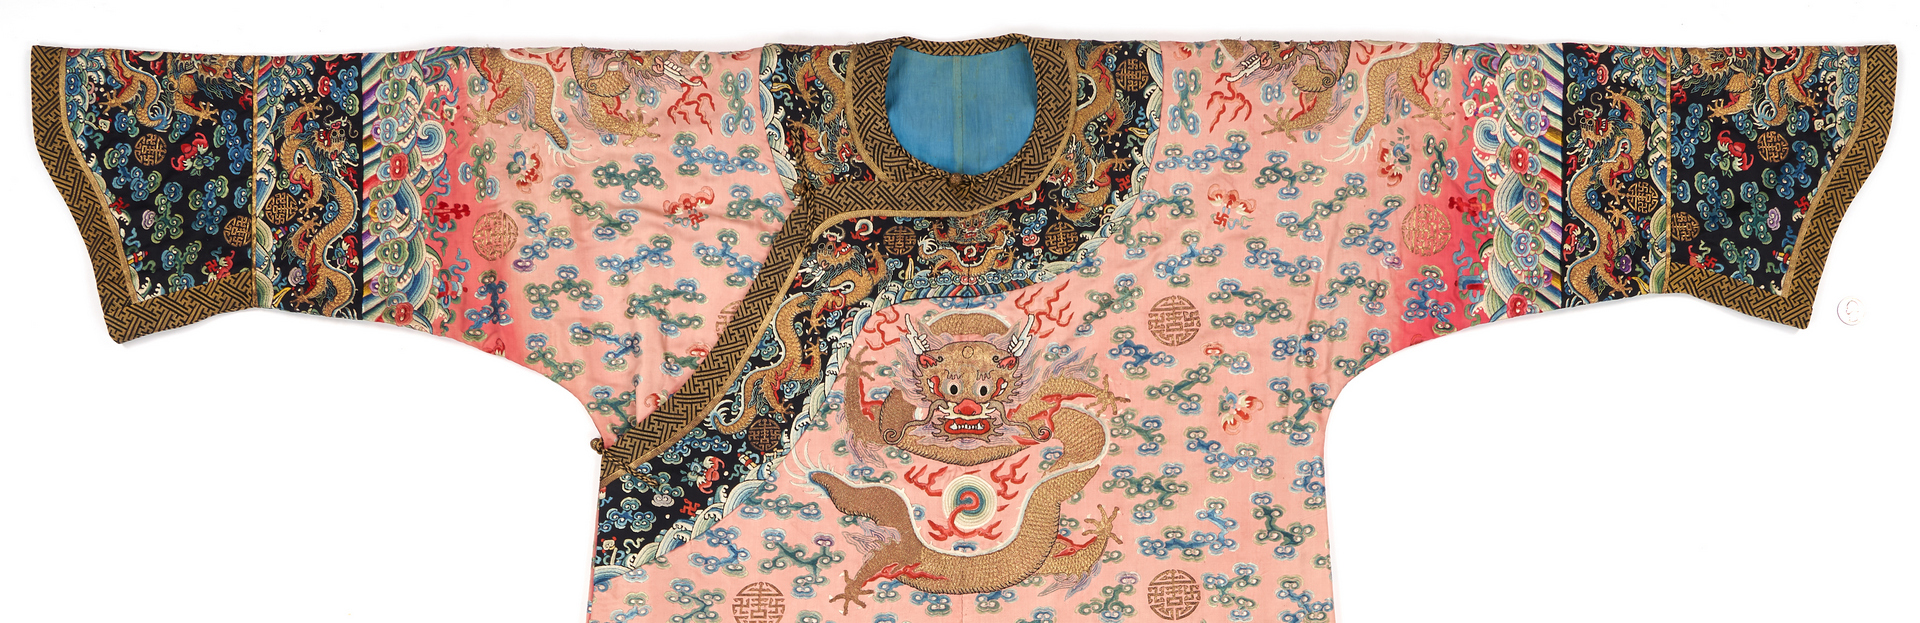 Lot 44: Chinese Qing Silk Court Robe with Dragons